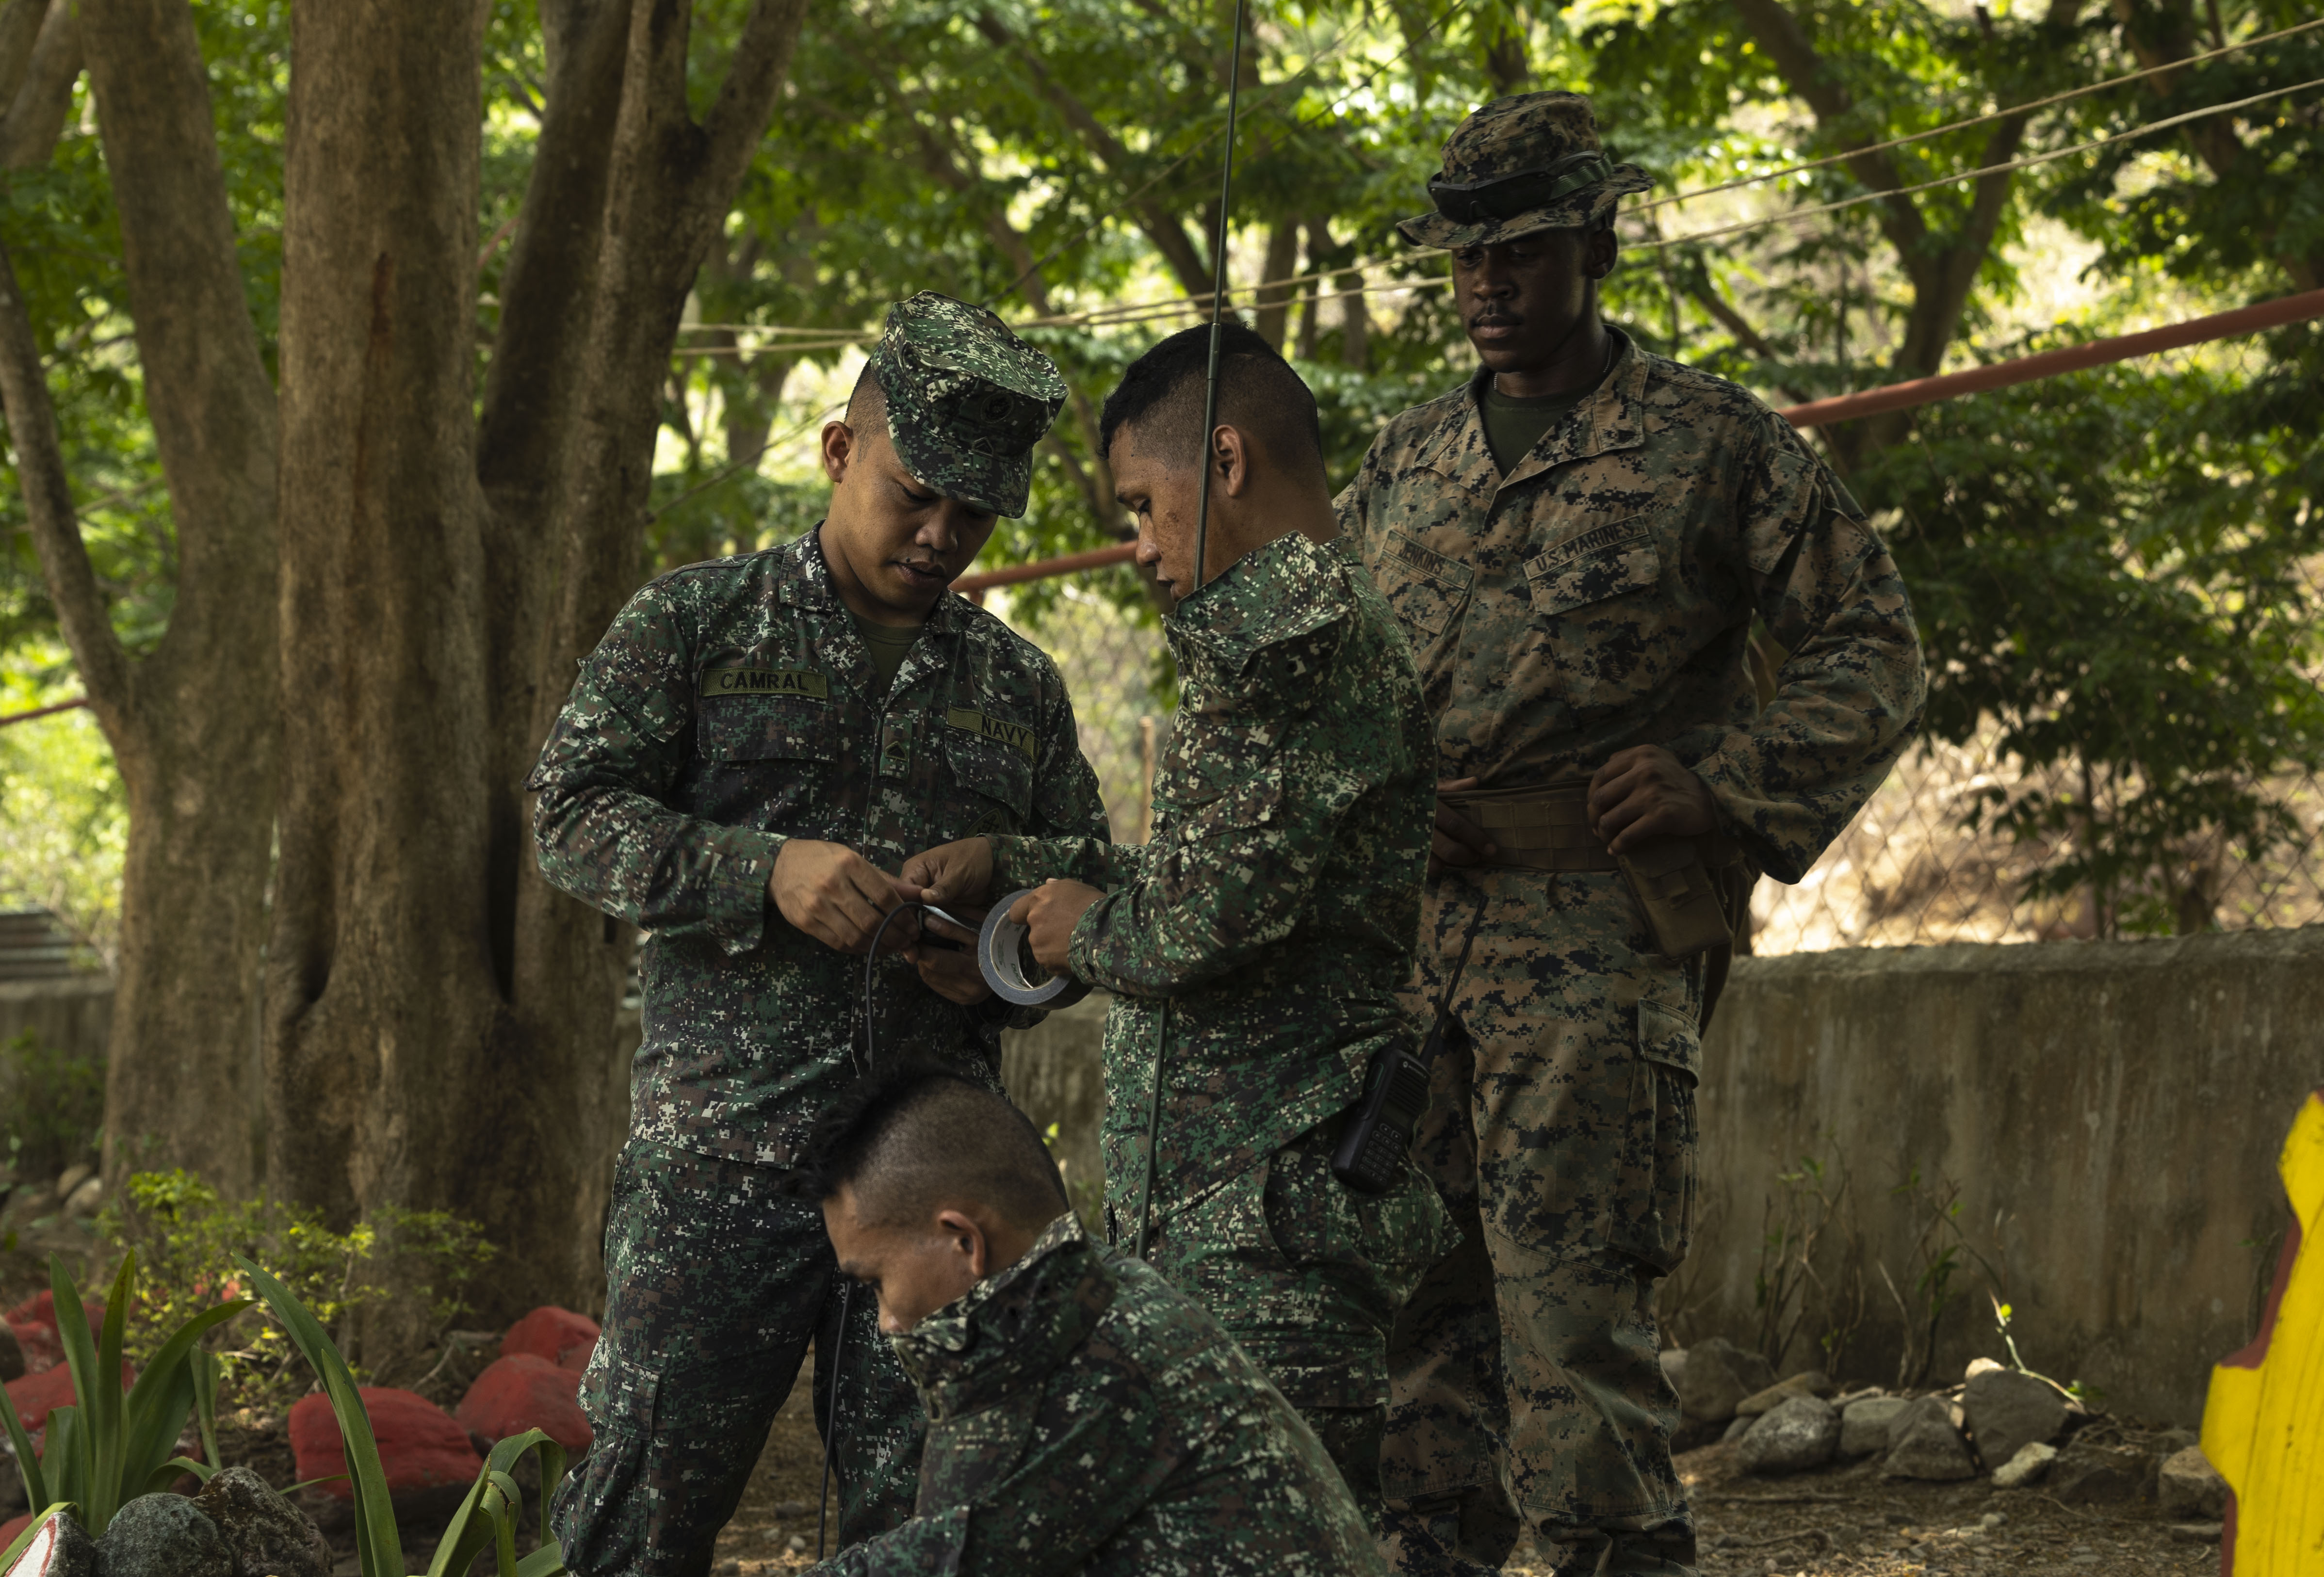 U.S. Marine Corps Cpl. Niles J. Jenkins, right, a radio operator, with Headquarters Battalion, 3d Marine Division, conducts radio communications training with Philippine Marines during Balikatan 23 at Marine Base Gregorio Lim, Philippines, April 18, 2023. Balikatan 23 is the 38th iteration of the annual bilateral exercise between the Armed Forces of the Philippines and the U.S. military. The exercise includes three weeks of training focused on amphibious operations, command and control, humanitarian assistance, urban operations and counterterrorism skills throughout northern and western Luzon. Coastal defense training figures prominently in the Balikatan 23 training schedule. Niles is a native of Baltimore, MD.